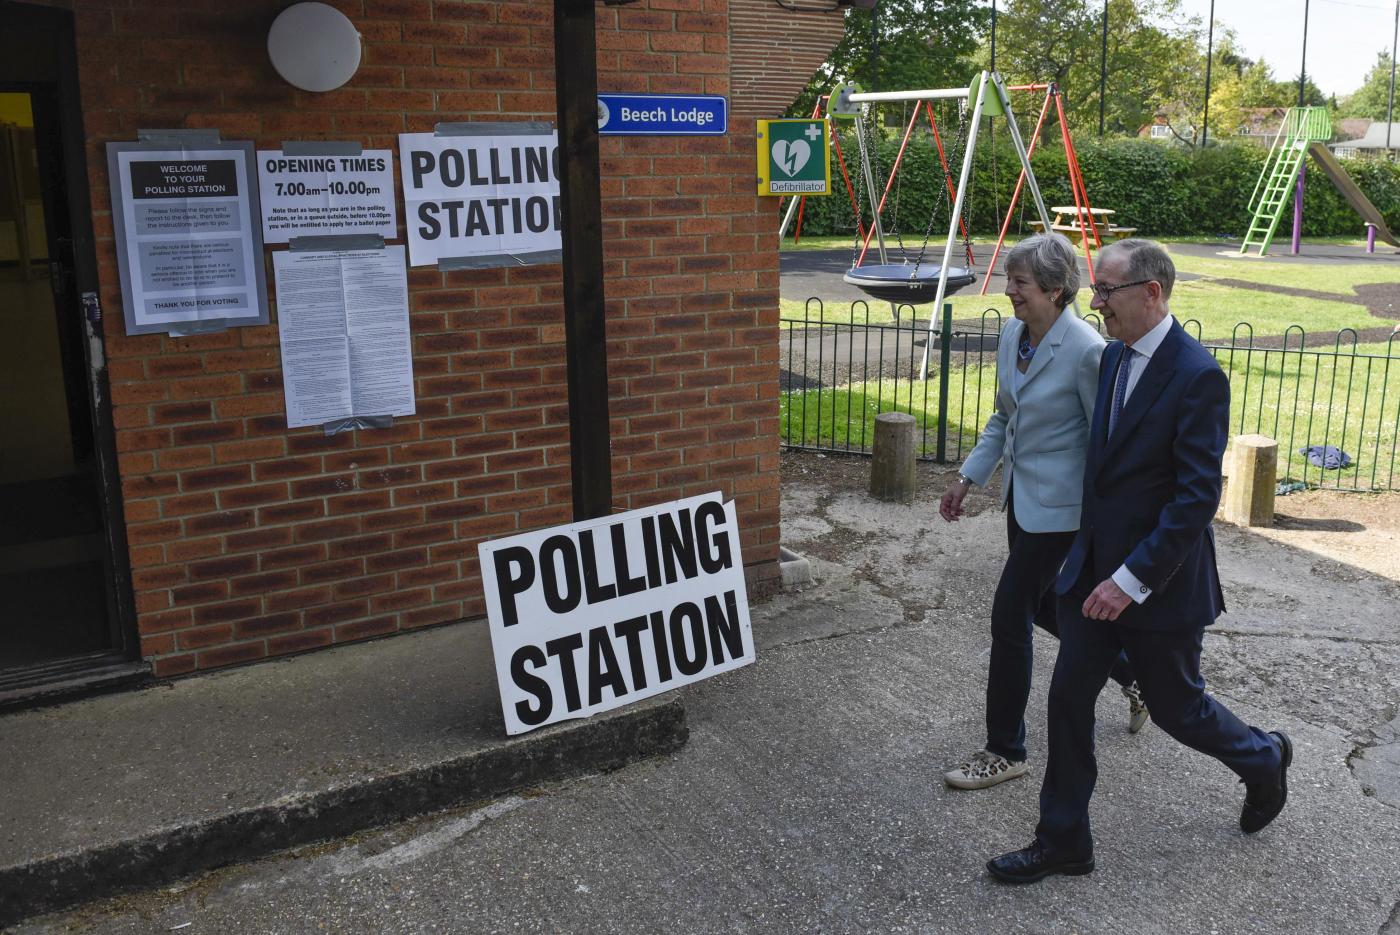 SONNING (BRITAIN), May 23, 2019 (Xinhua) -- British Prime Minister Theresa May (L) arrives to vote at a polling station in Sonning, Britain, on May 23, 2019. Voters across Britain cast their ballots on Thursday for the European Parliament elections as it is widely forecast that Brexit Party will take a lead. (Xinhua/Stephen Chung/IANS) by Stephen Chung.